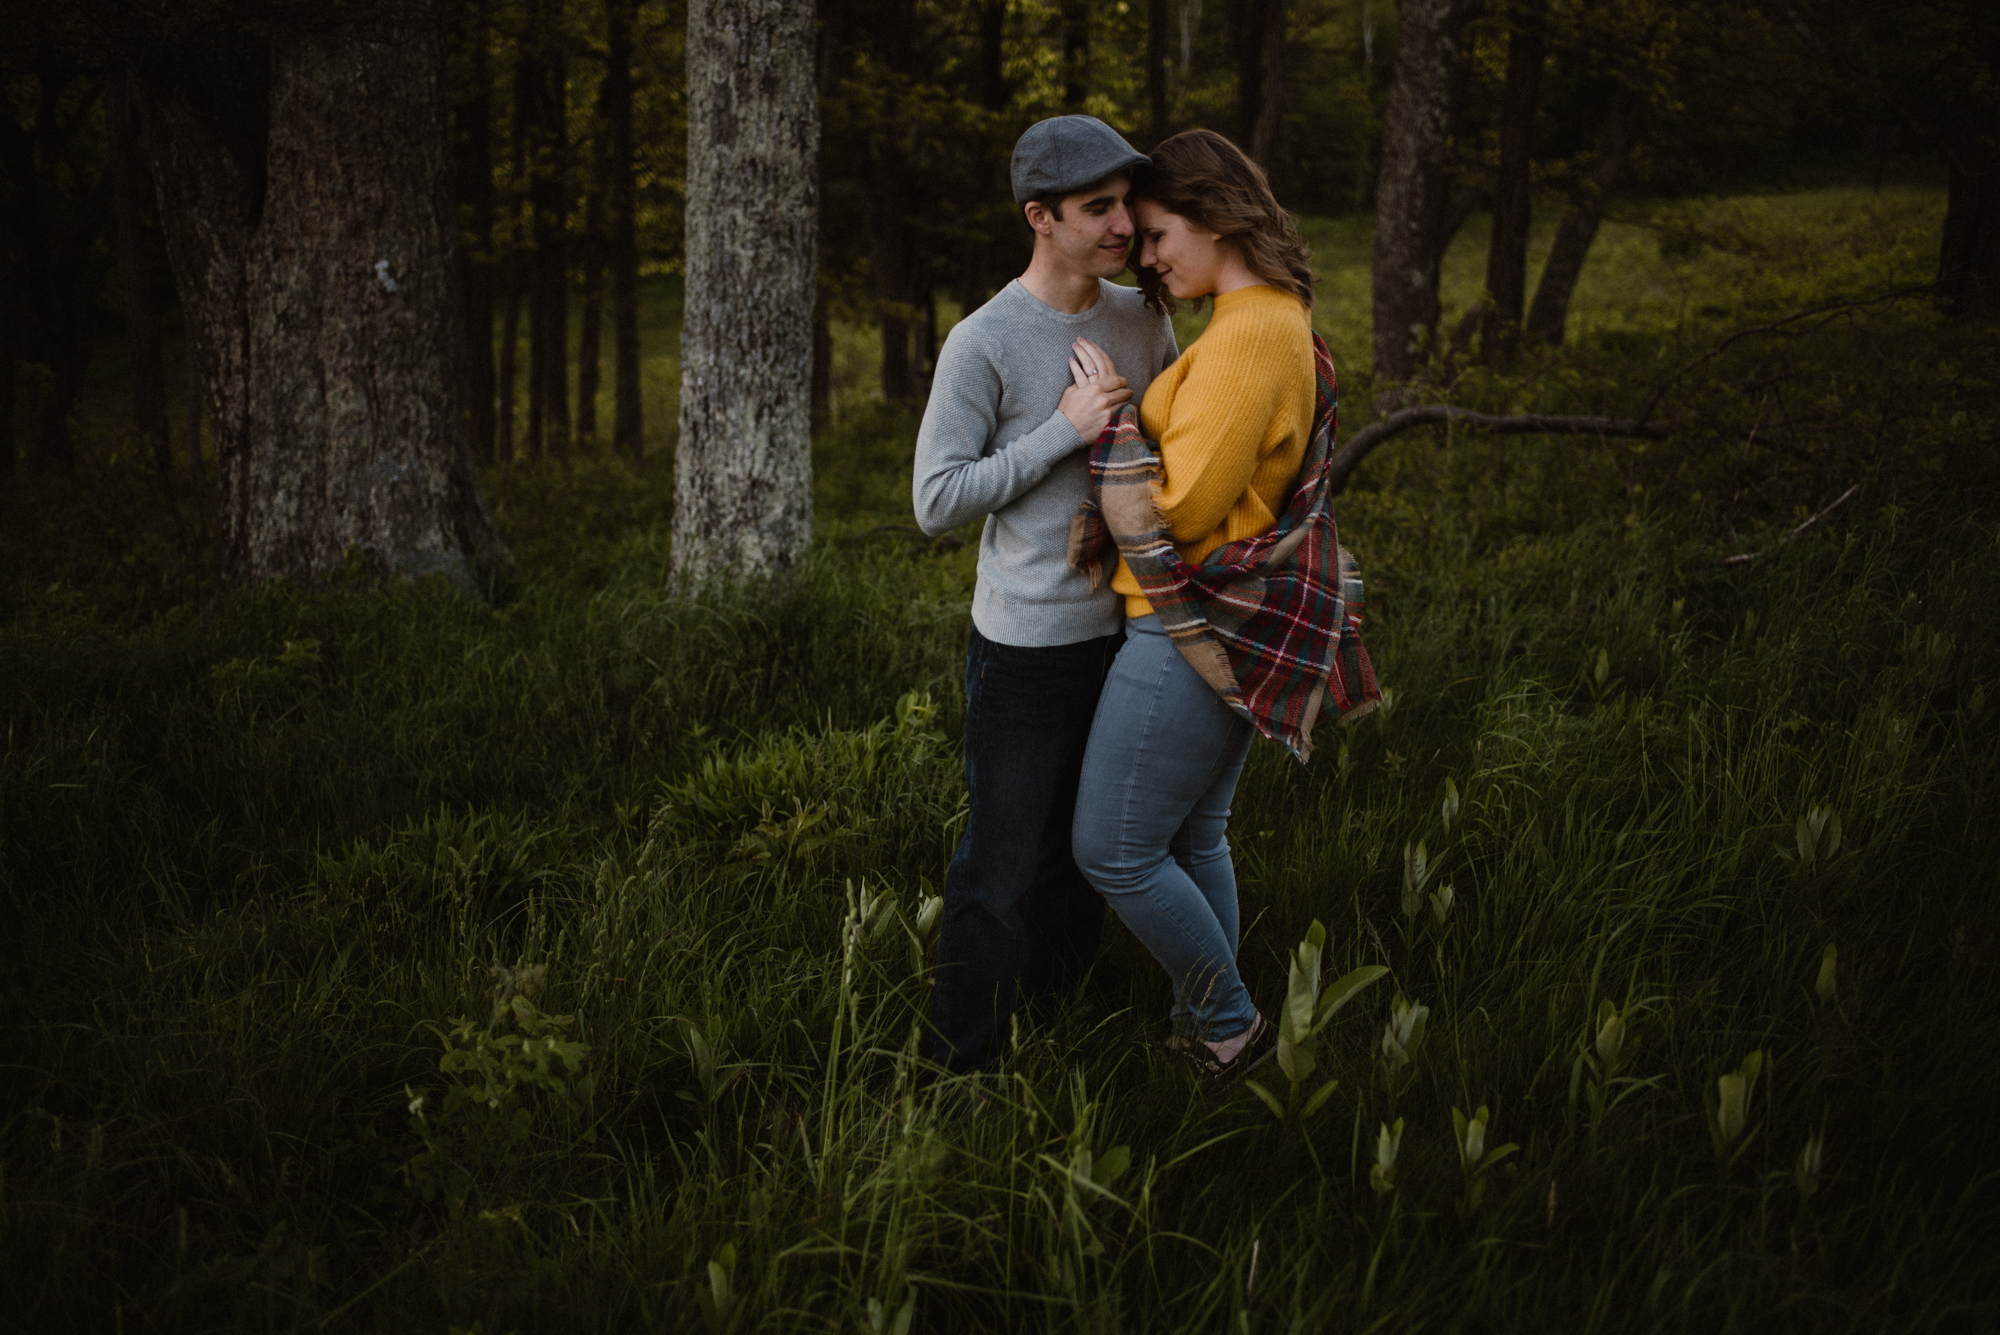 Sloane and Evan Sunrise Engagement Session in Shenandoah National Park - Things to Do in Luray Virginia - Adventurous Couple Photo Shoot White Sails Creative_21.jpg